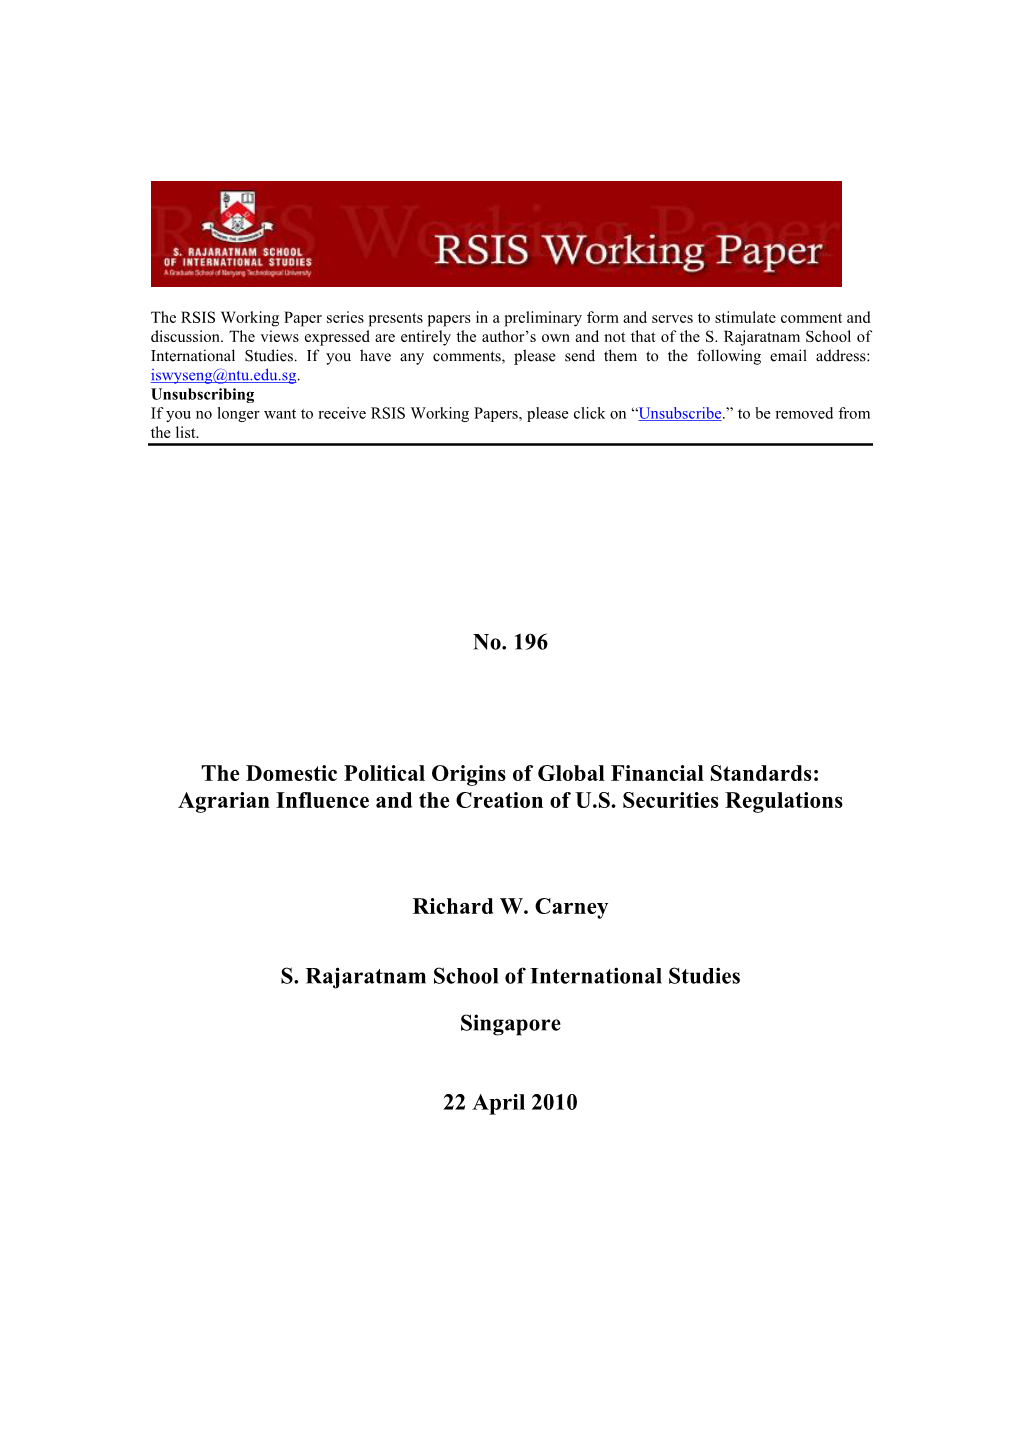 No. 196 the Domestic Political Origins of Global Financial Standards